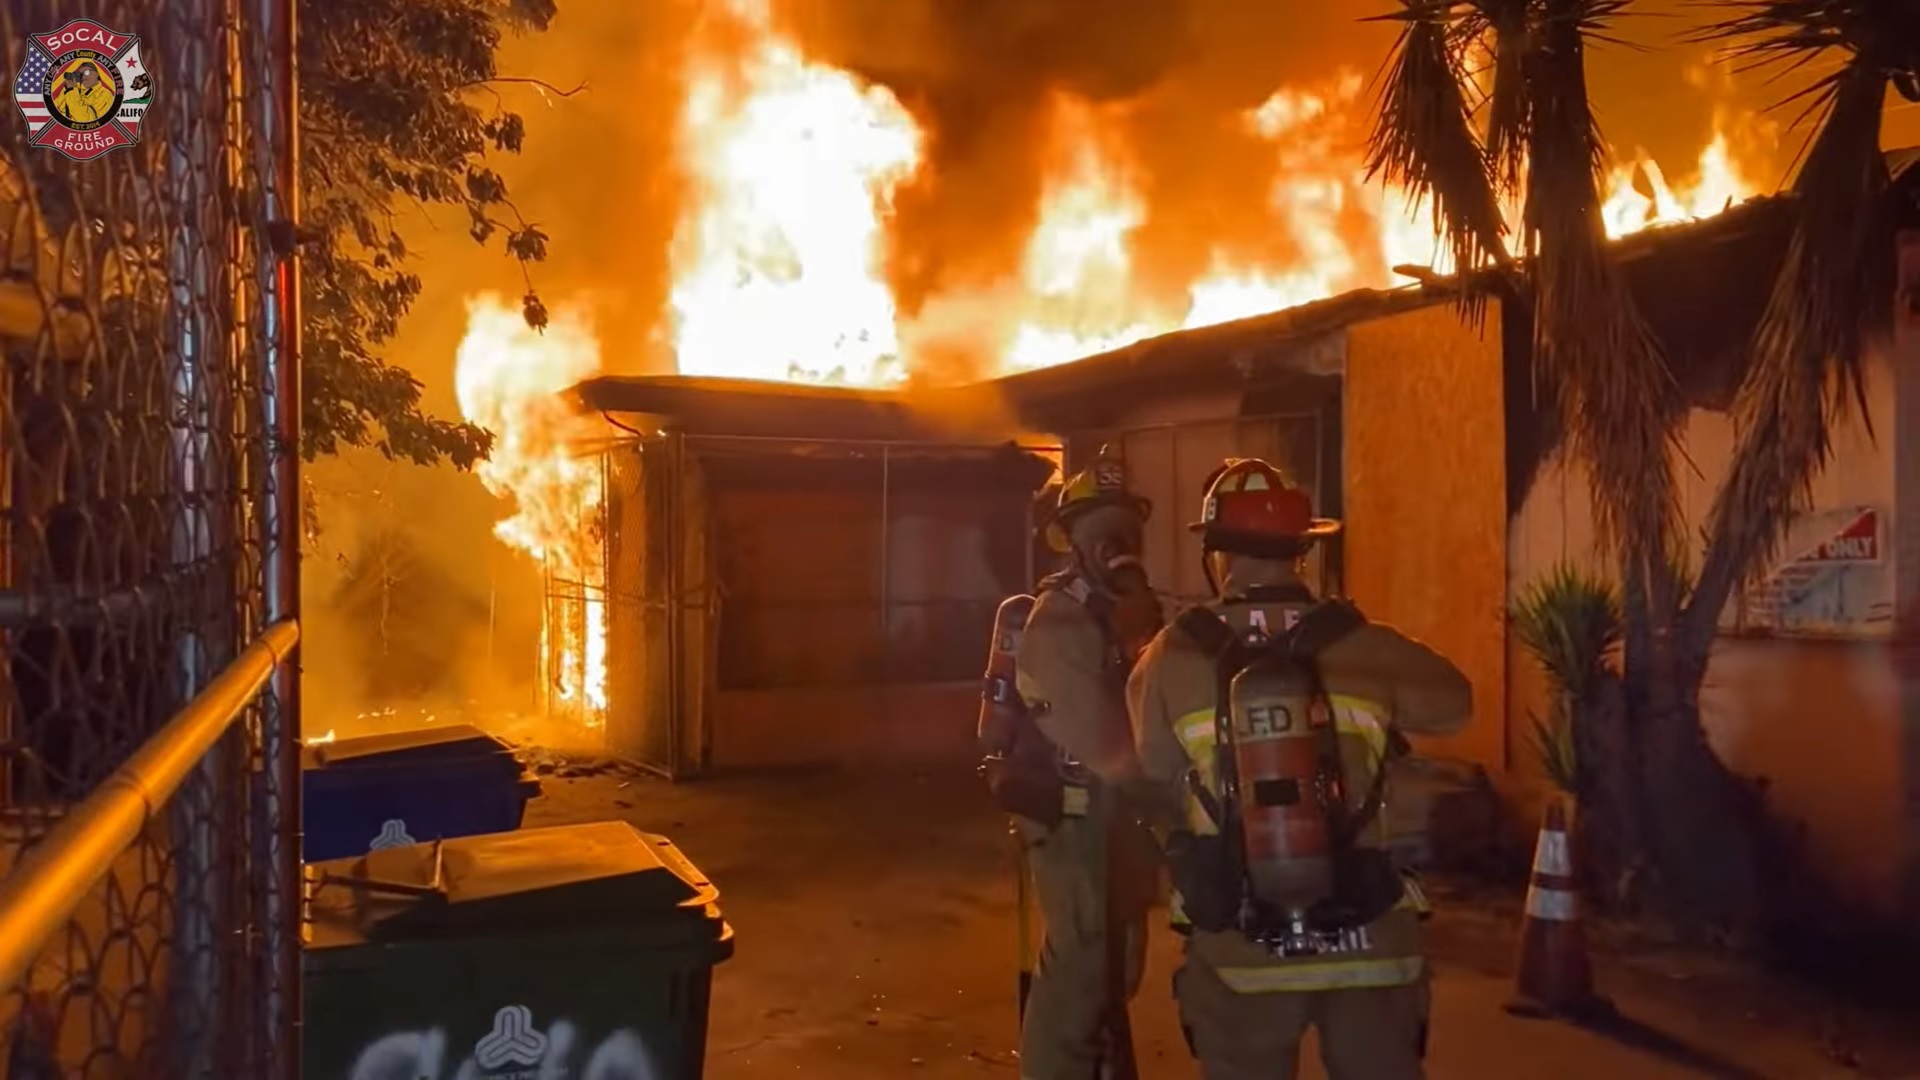 Arrival video from a California house fire